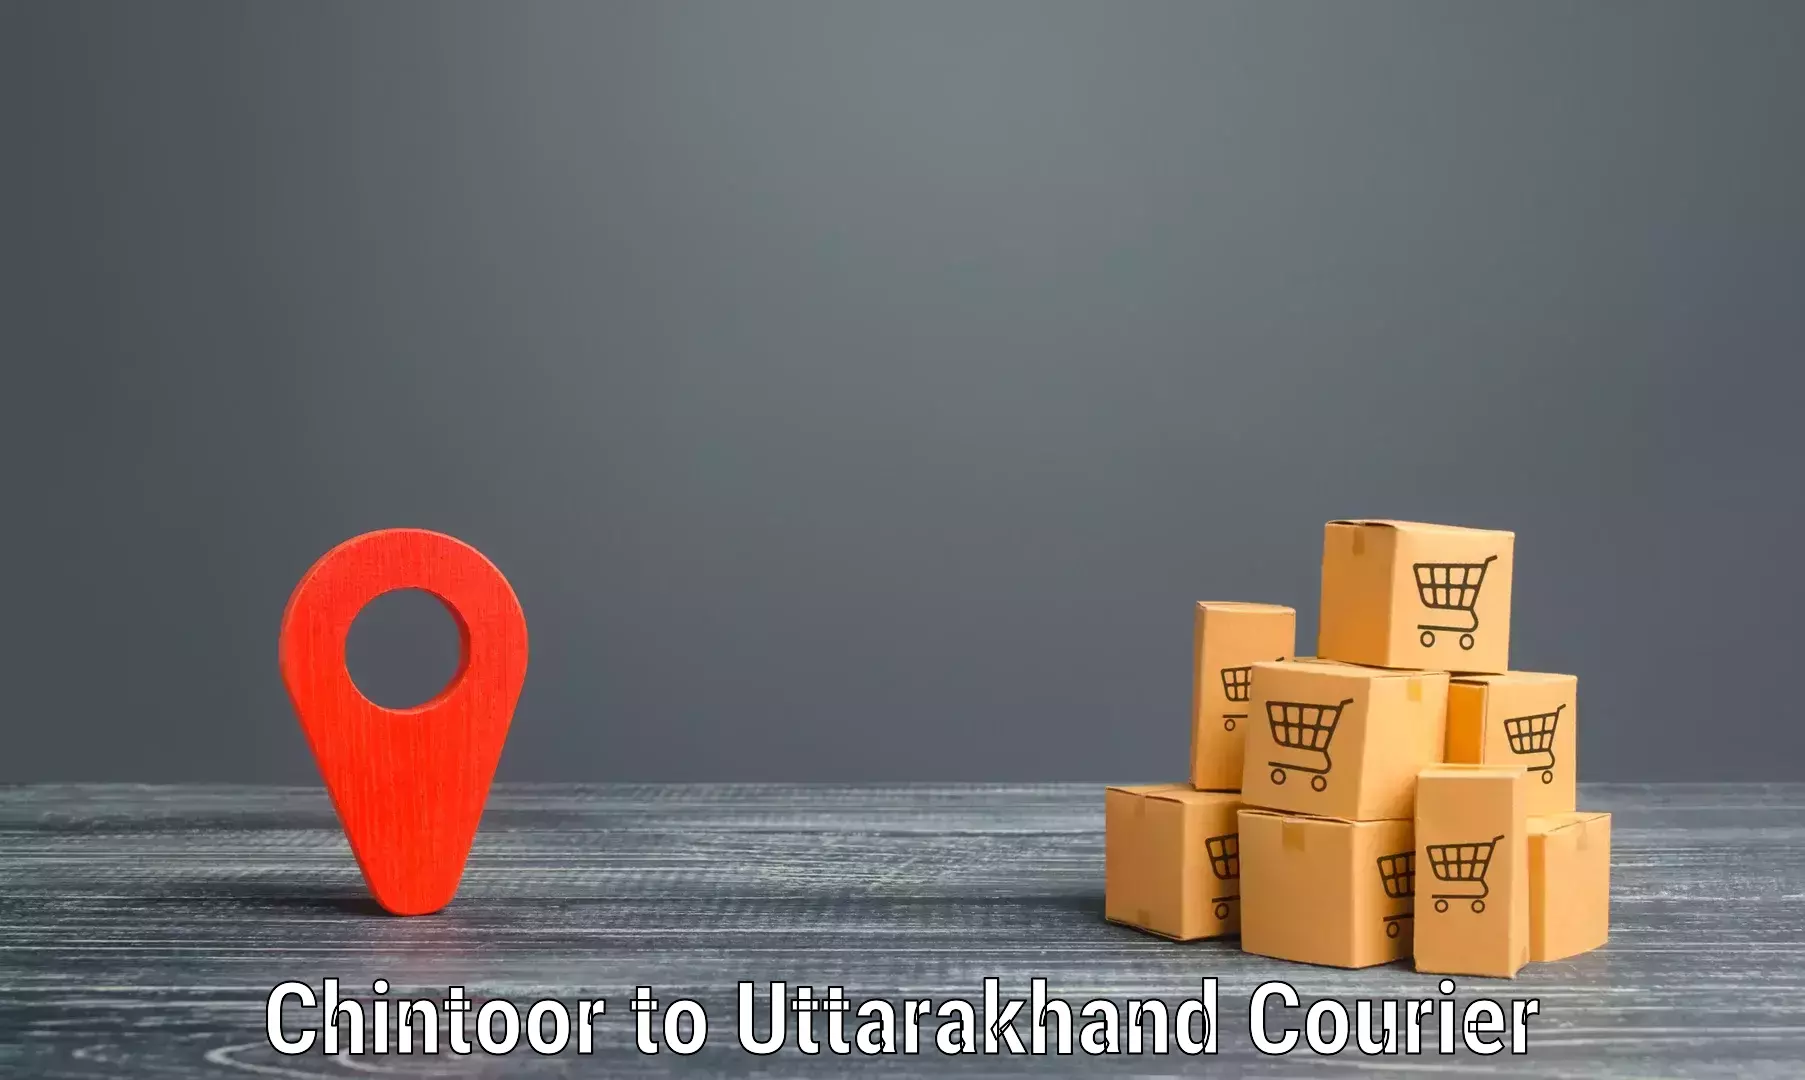 State-of-the-art courier technology Chintoor to Sitarganj